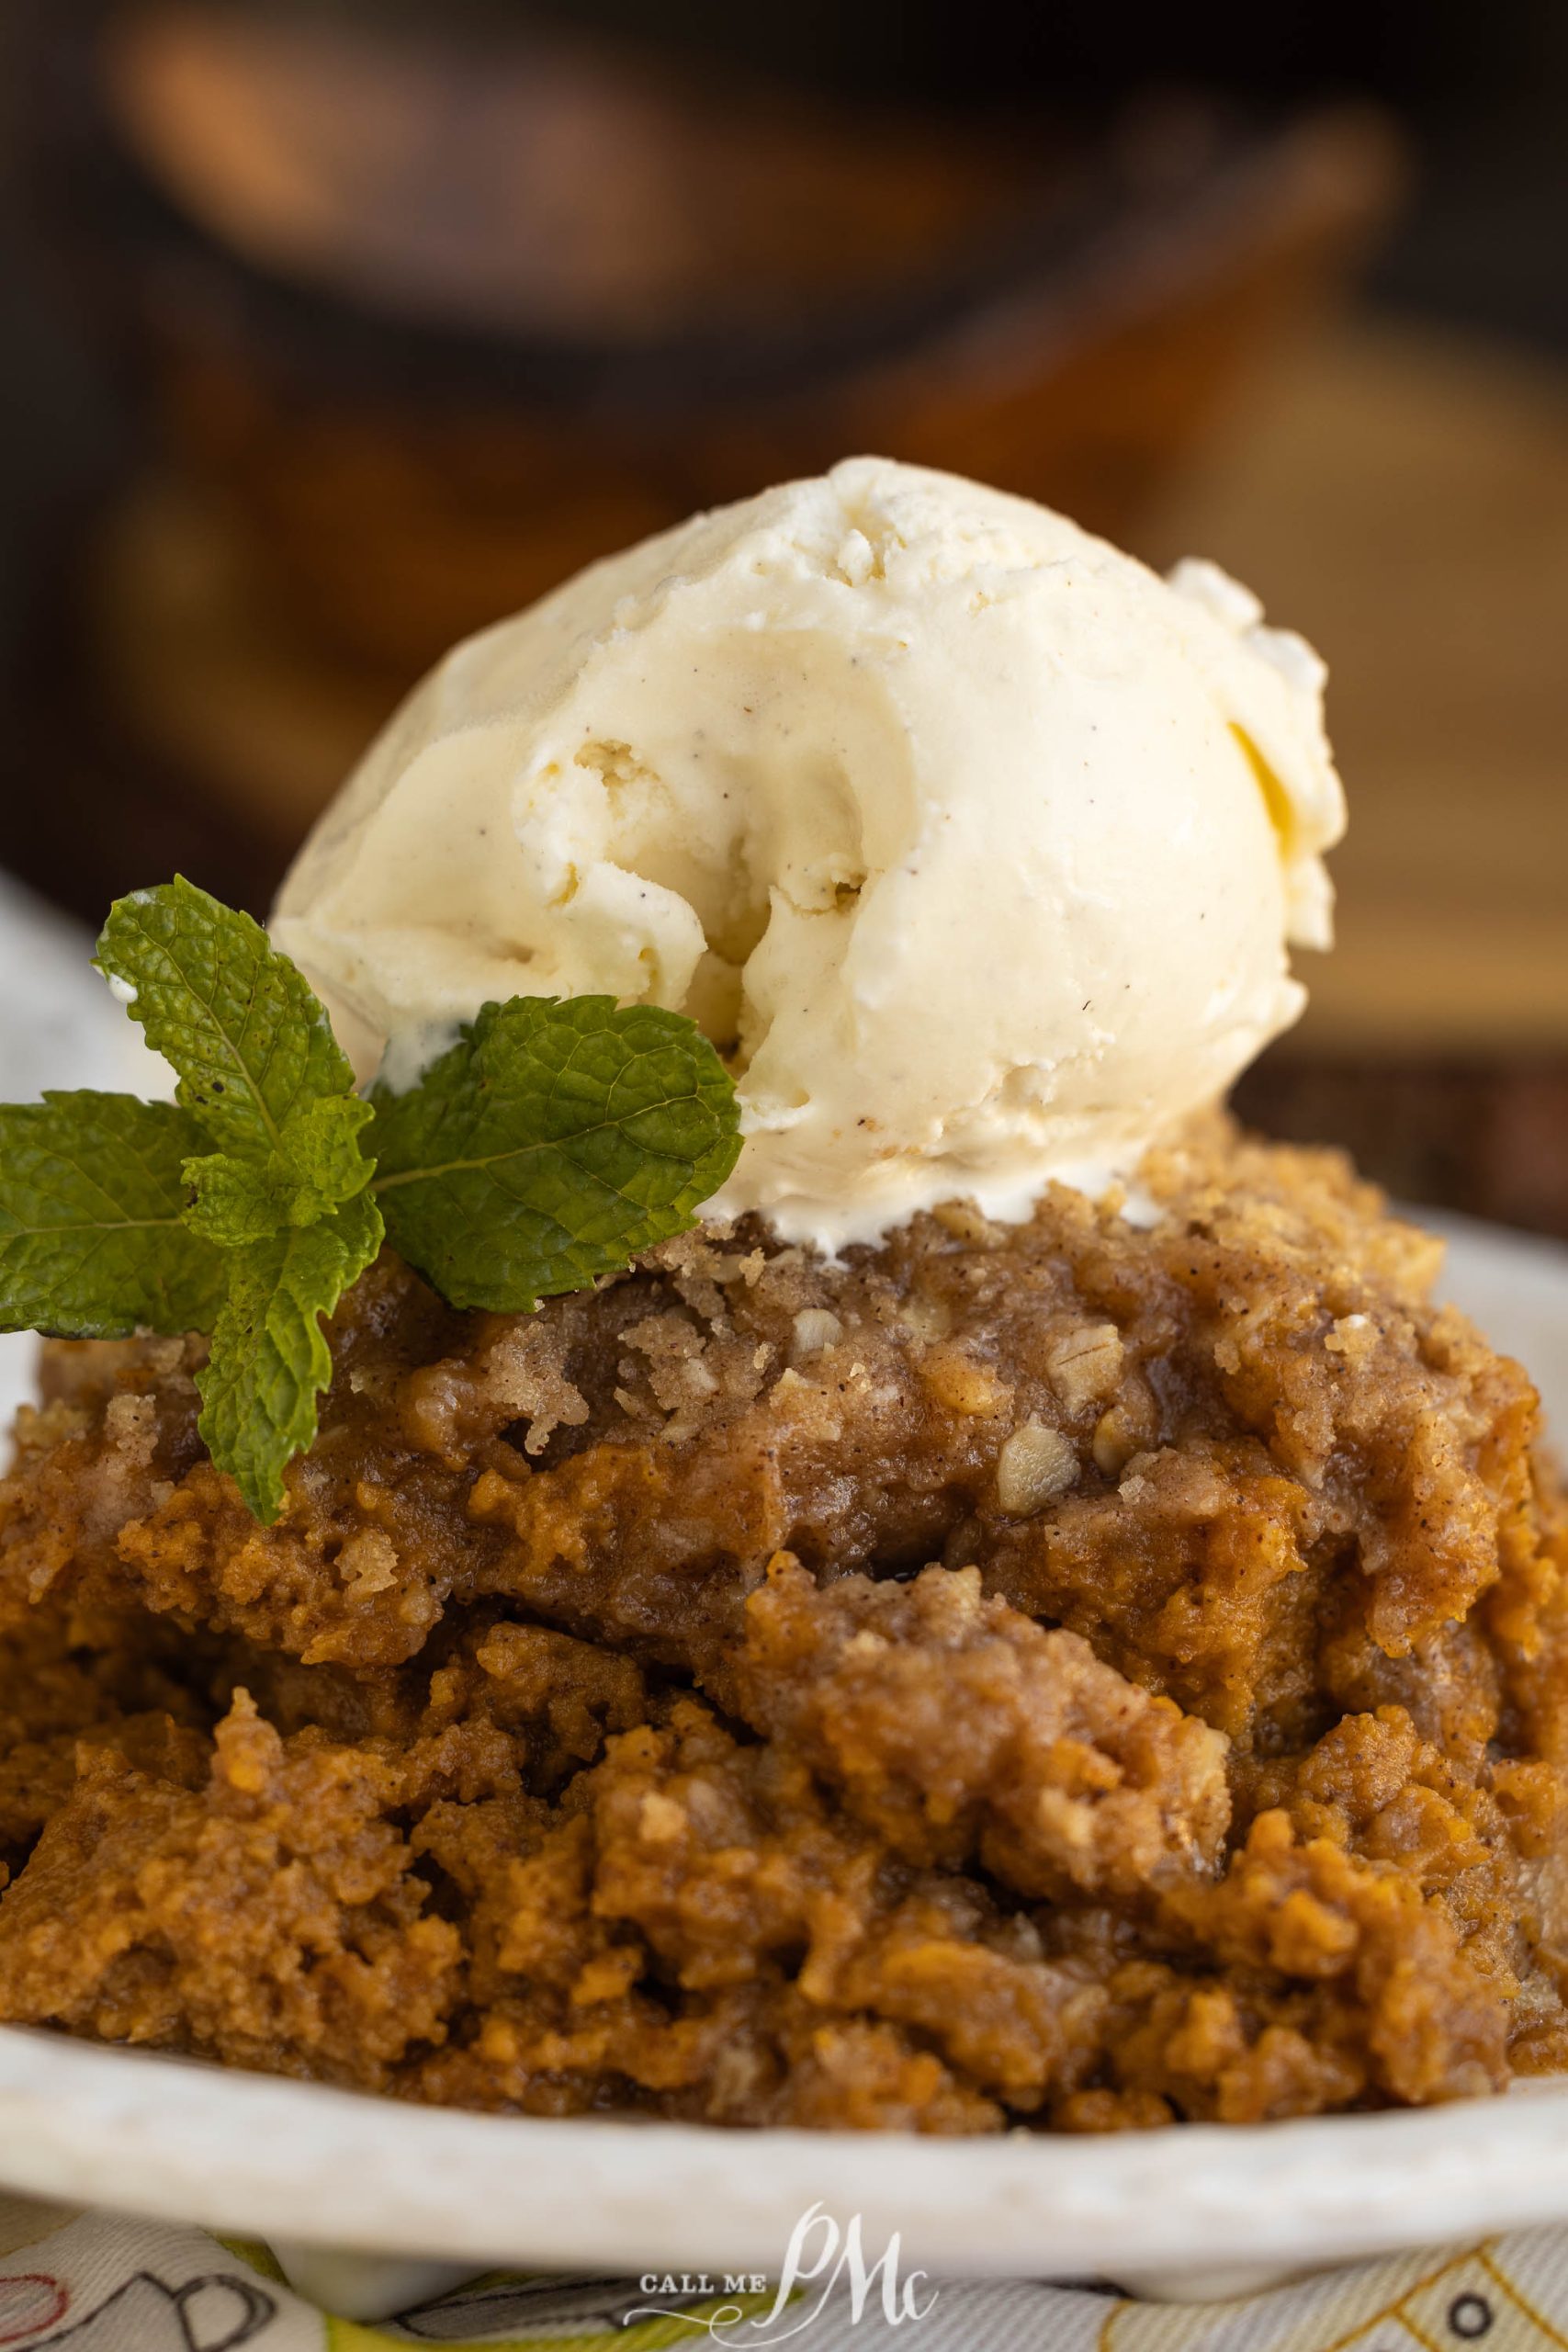 Crustless Pumpkin Pie Crumble with ice cream on a plate.